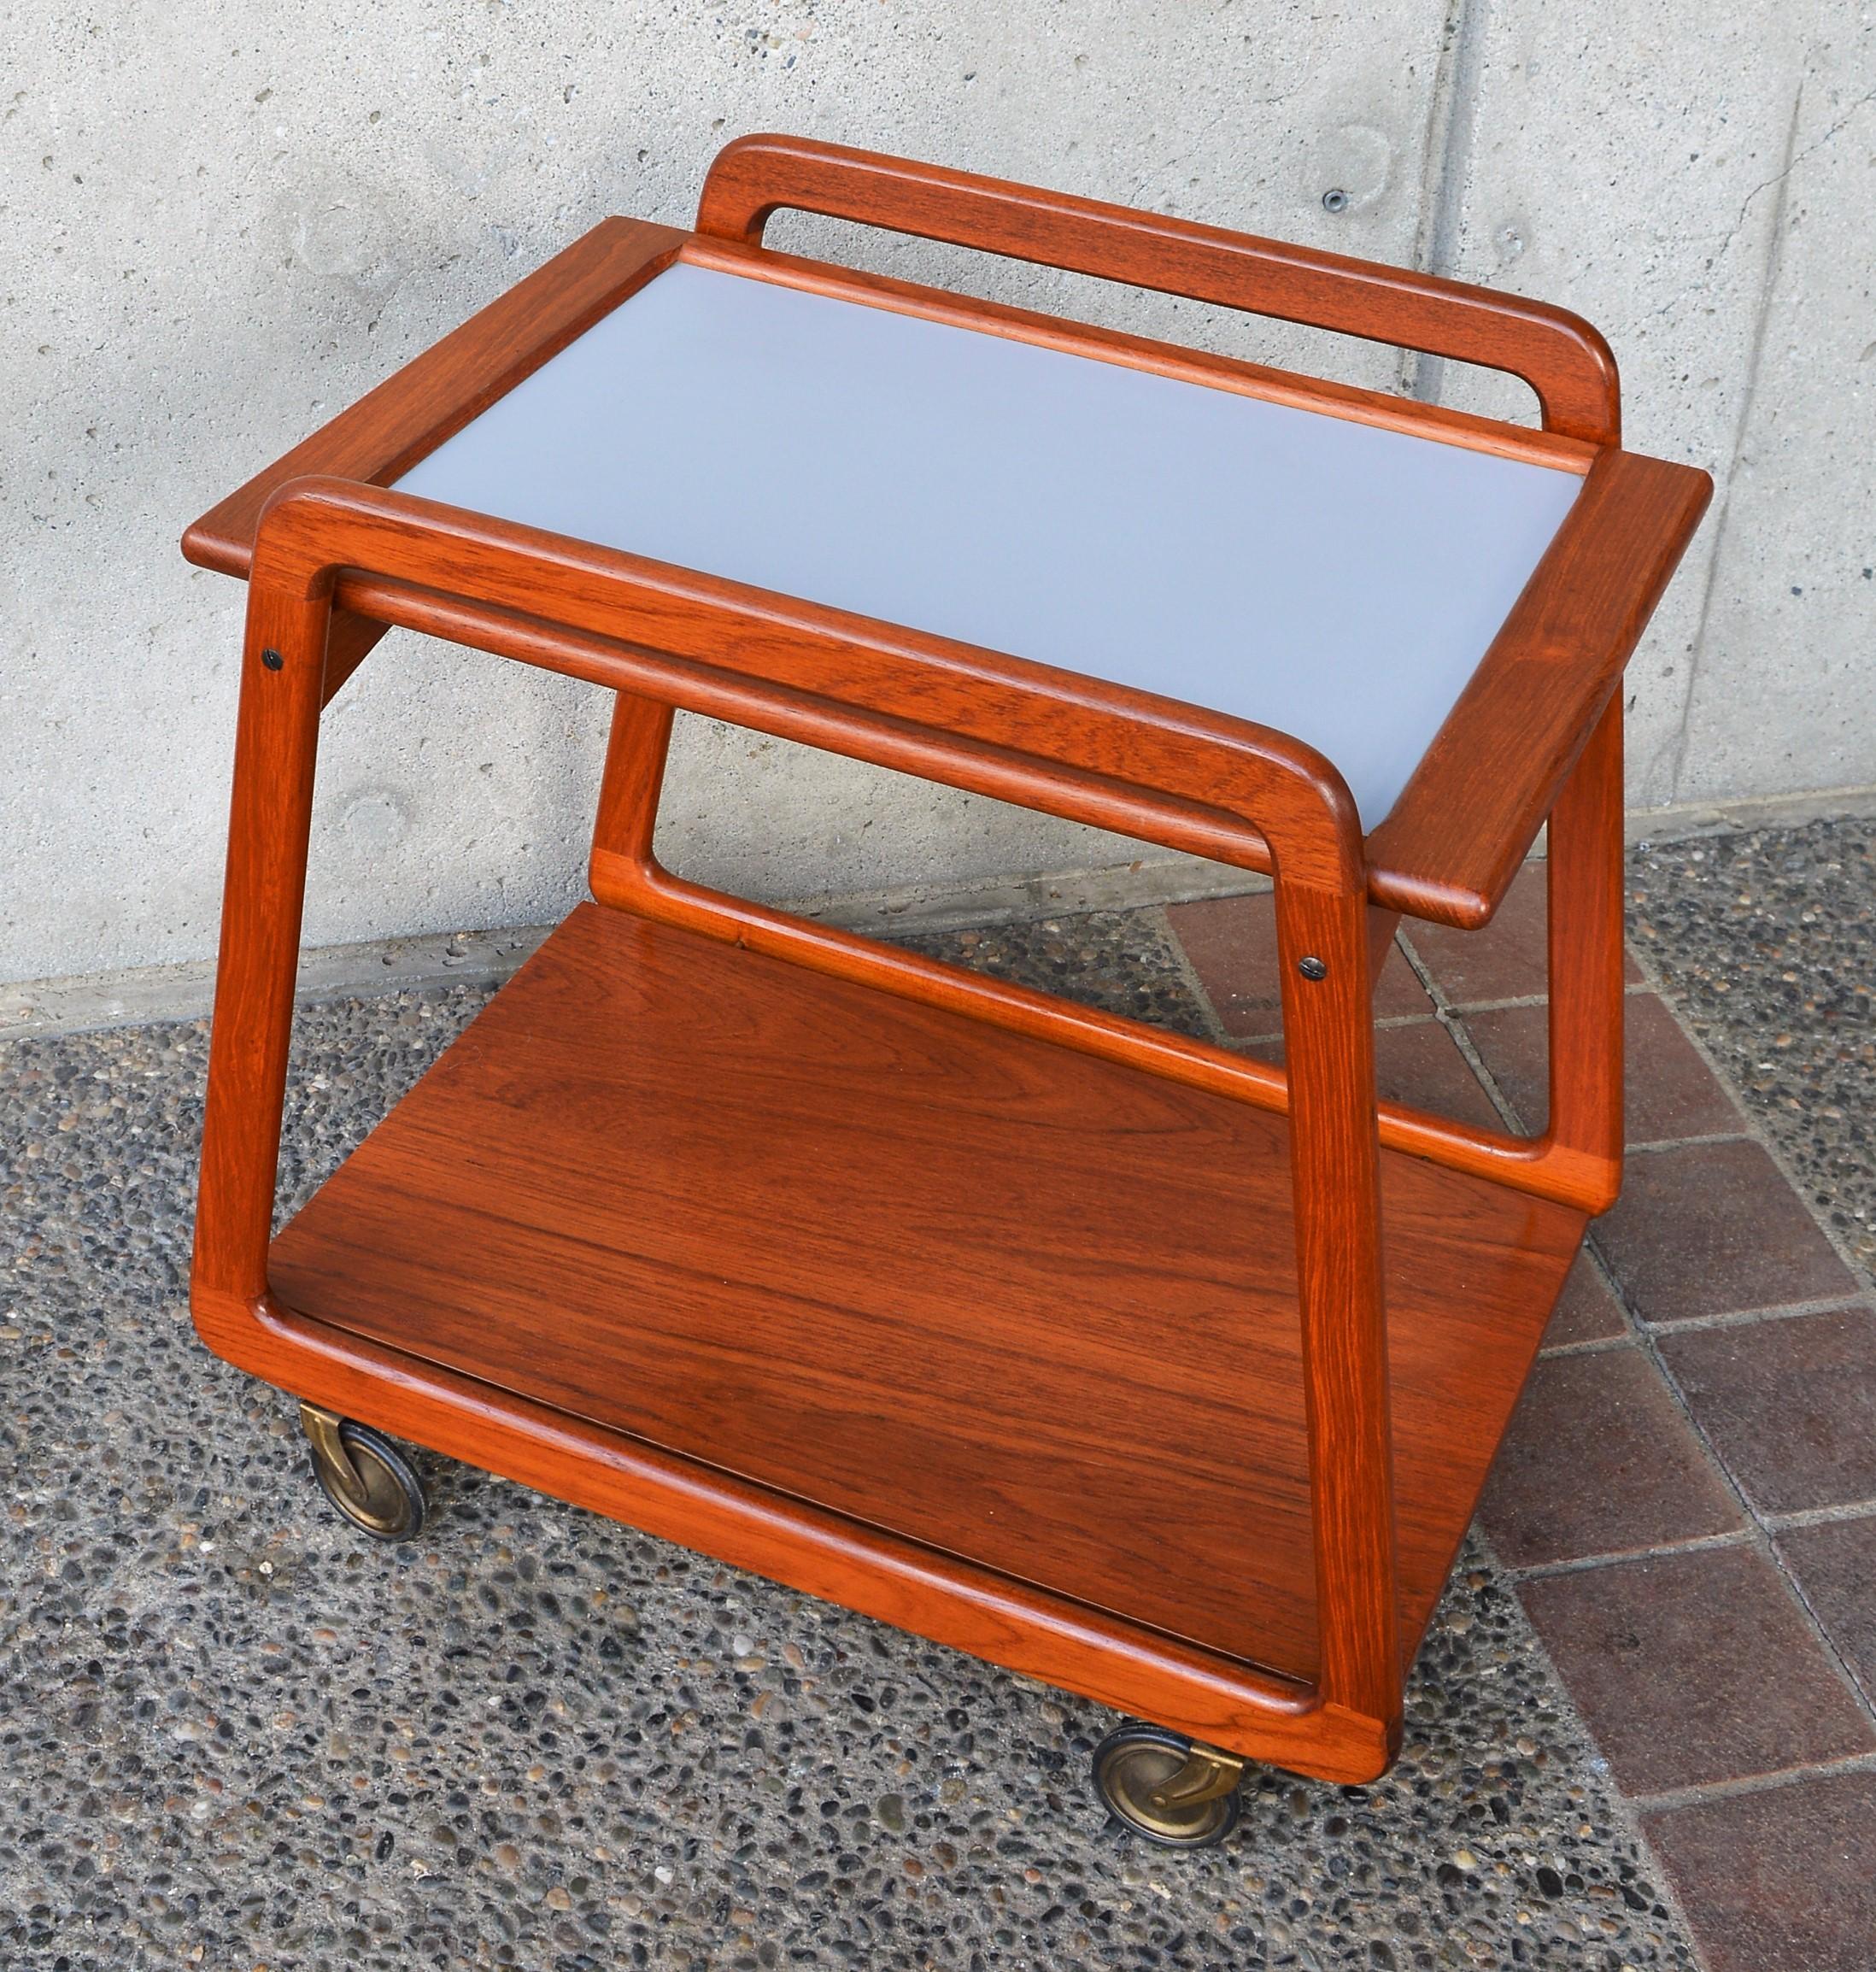 This super fun Danish modern teak bar cart or tea trolley has awesome lines! It features trapezoidal shaped sides, arced upper braces that support the two side’s tray top, a lower floating shelf held by brass pins, and Classic brass skinny 1950s